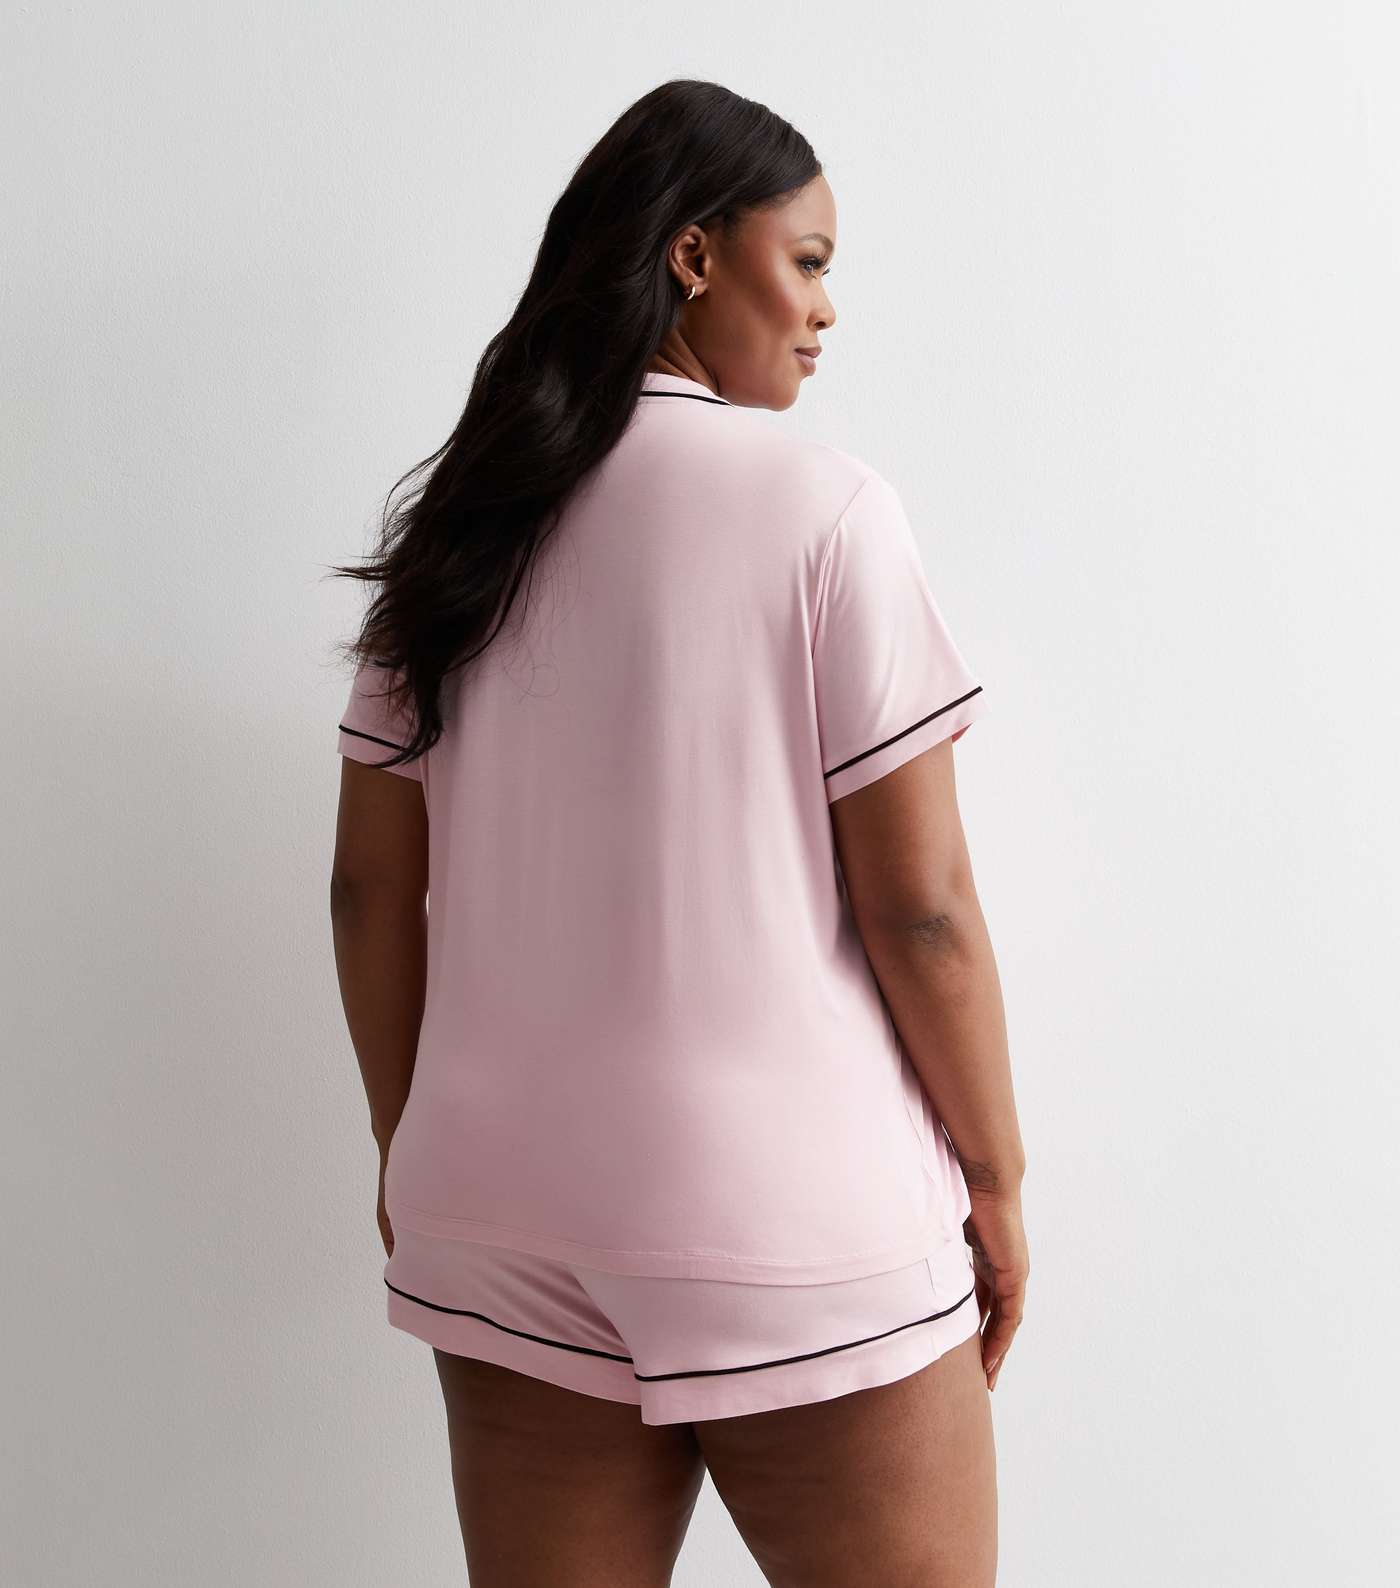 Curves Pale Pink Short Pyjama Set with Piping Trim Image 4